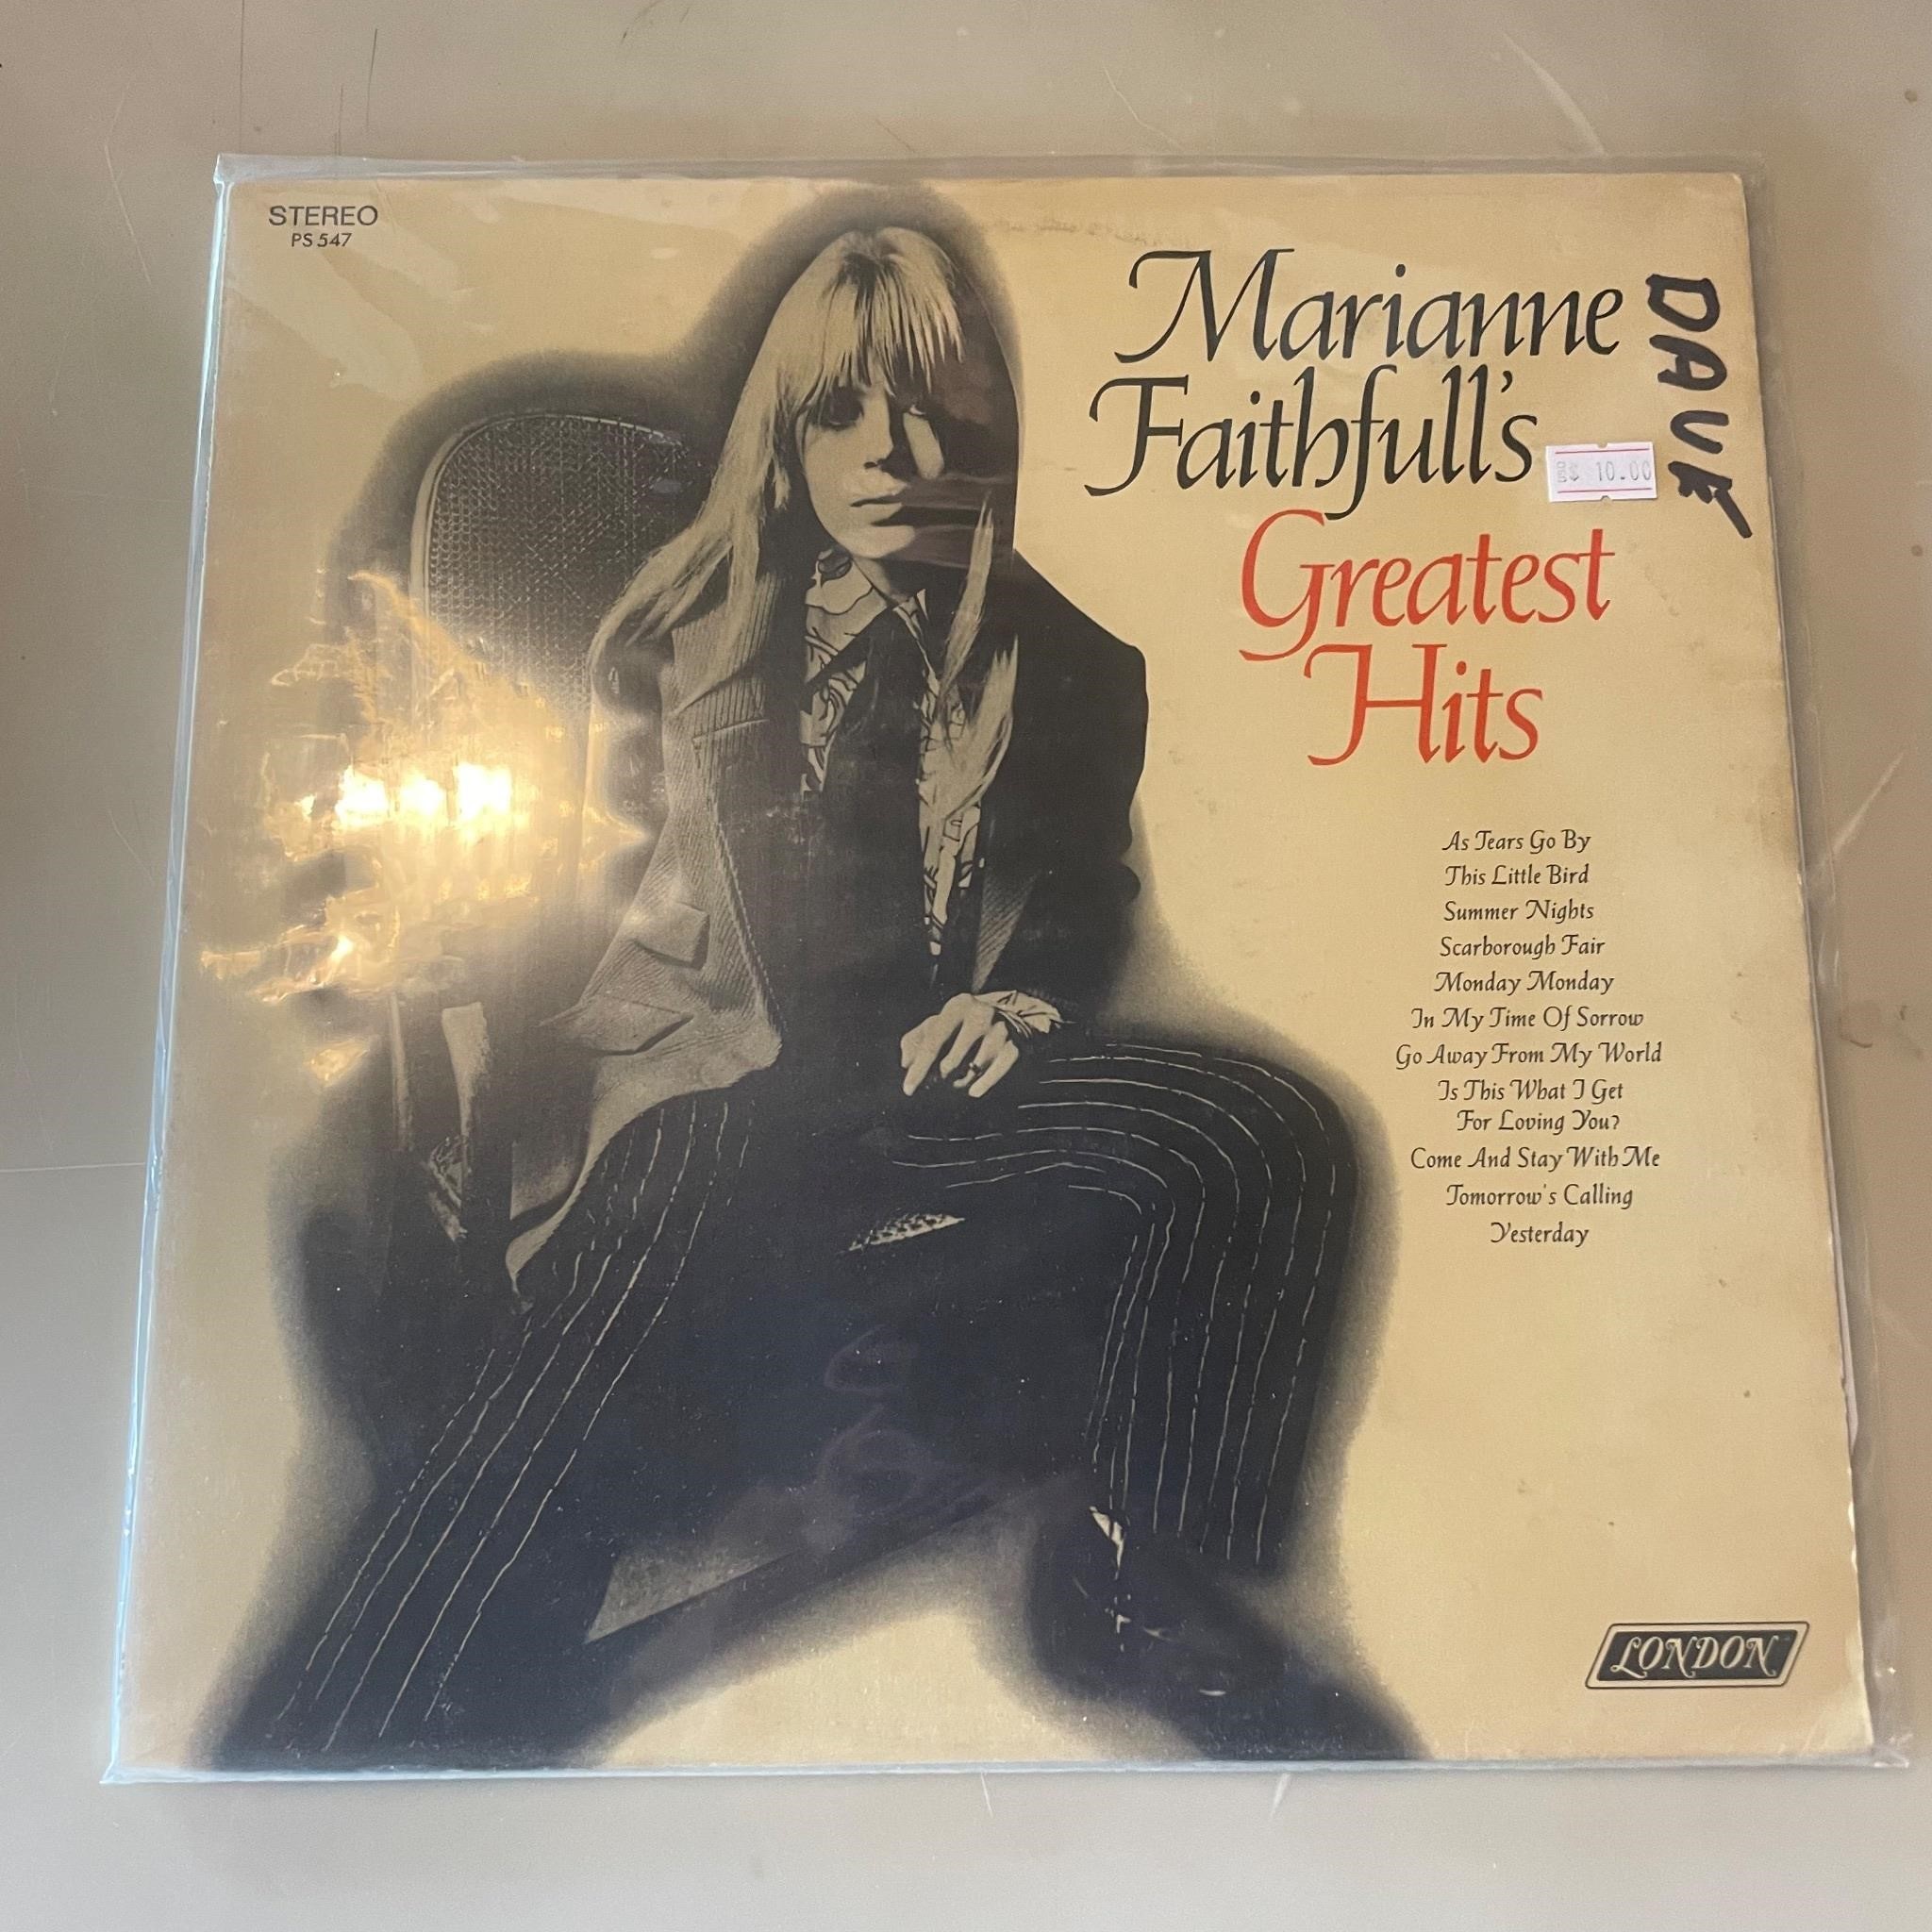 MAY VINYL RECORD Weekly auction UNLIMITED $12 SHIPMENT